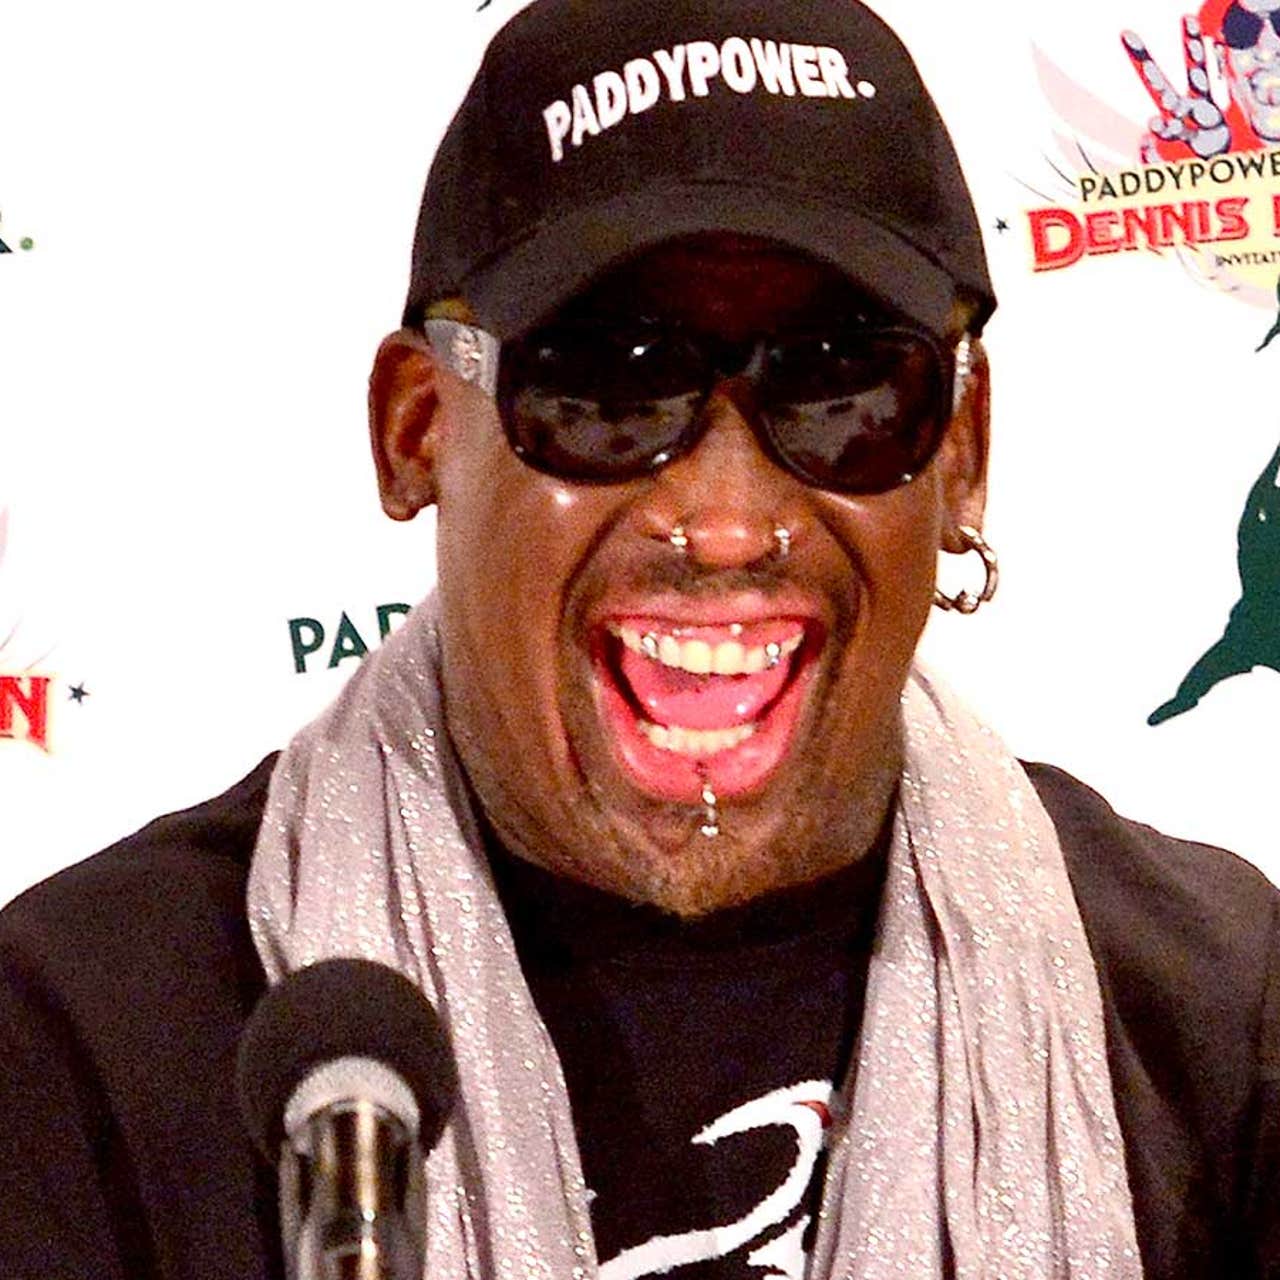 Dennis Rodman became the steal of the '86 NBA Draft thanks to an